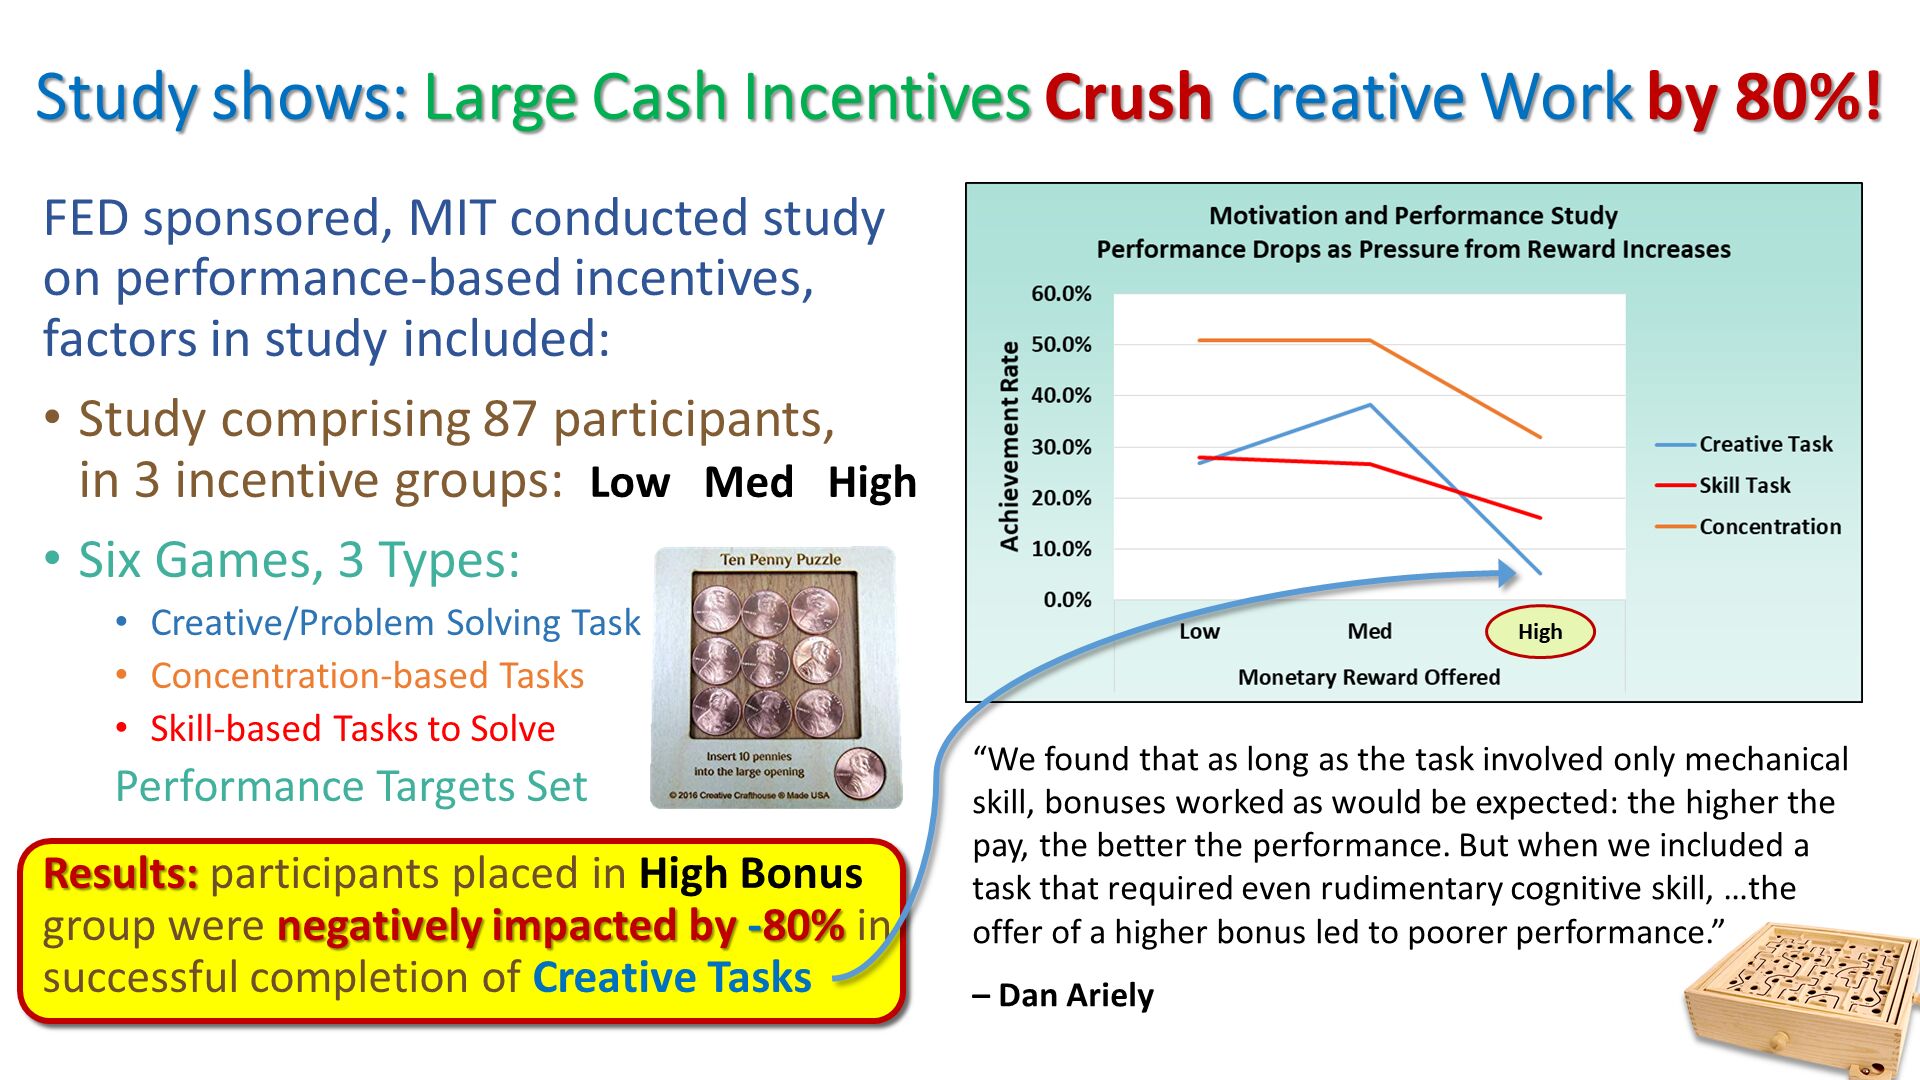 Study shows: Large Cash Incentives Crush Creative Work by 80%!. “We found that as long as the task involved only mechanical skill, bonuses worked as would be expected: the higher the pay, the better the performance. But when we included a task that required even rudimentary cognitive skill, …the offer of a higher bonus led to poorer performance.”
– Dan Ariely . FED sponsored, MIT conducted study on performance-based incentives, factors in study included:
Study comprising 87 participants,in 3 incentive groups:  Low   Med   High
Six Games, 3 Types:
Creative/Problem Solving Task
Concentration-based Tasks
Skill-based Tasks to Solve
Performance Targets Set
Results: participants placed in High Bonus group were negatively impacted by -80% in successful completion of Creative Tasks. High. 